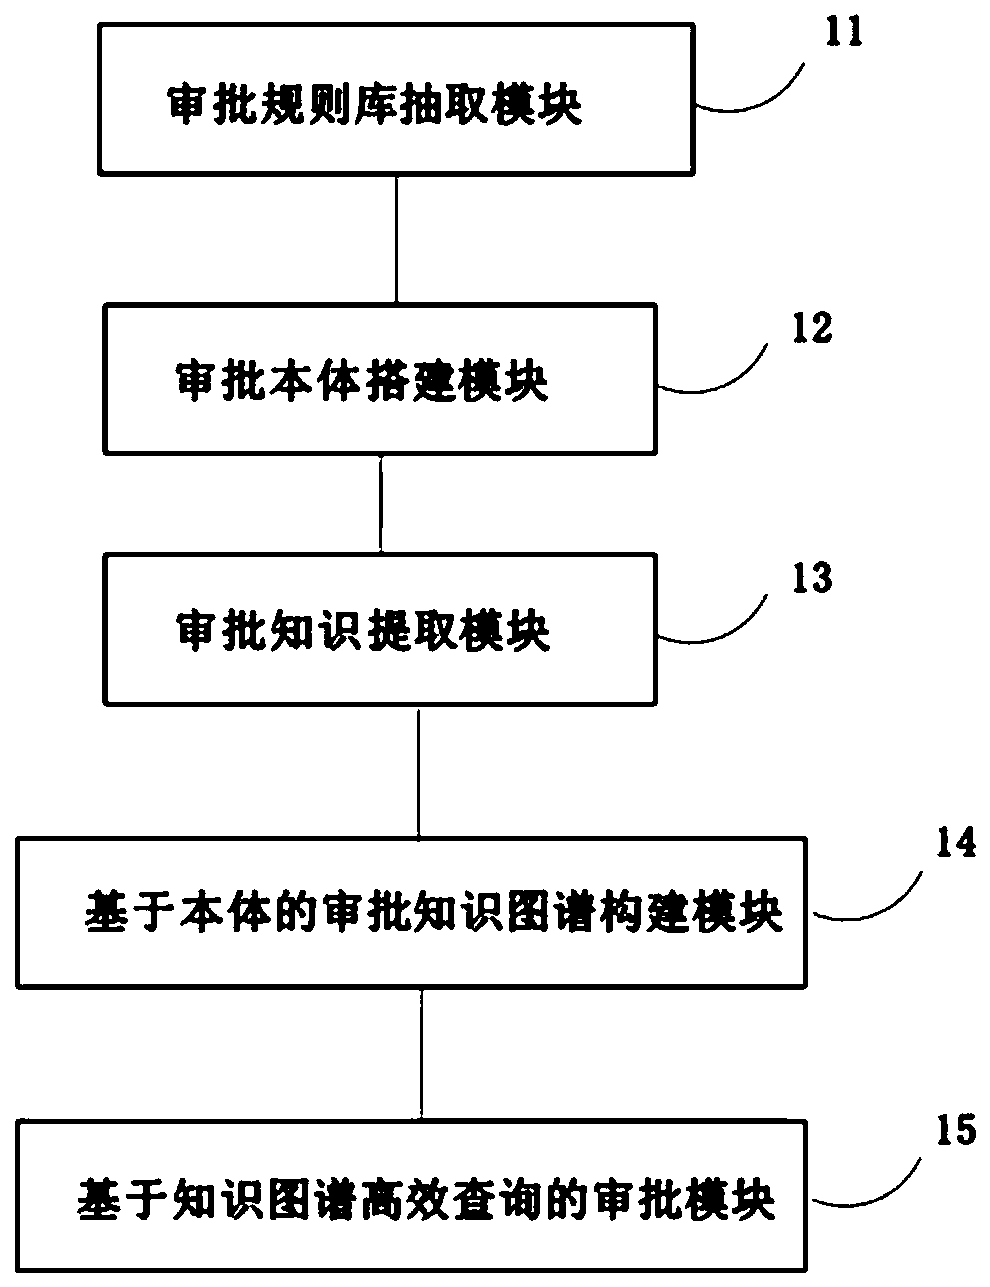 Artificial intelligence assisted administrative examination and approval method based on a knowledge graph